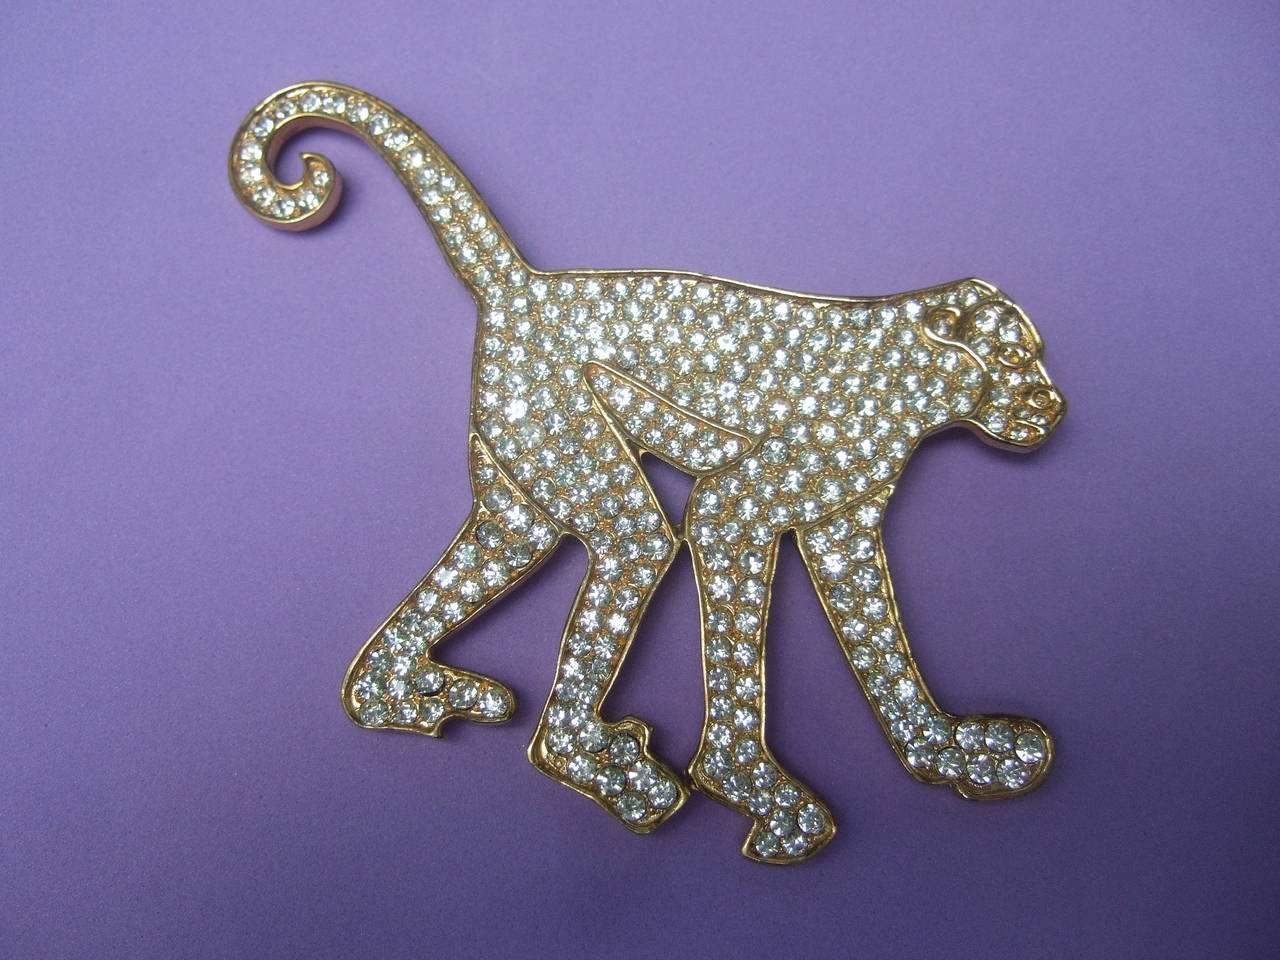 Massive avant-garde figural monkey brooch designed by Robin Kahn
The unique figural brooch is encrusted with glittering 
diamante pave crystals

The huge brooch is designed with gilt metal stamped 
Robin Kahn 

The whimsical monkey brooch